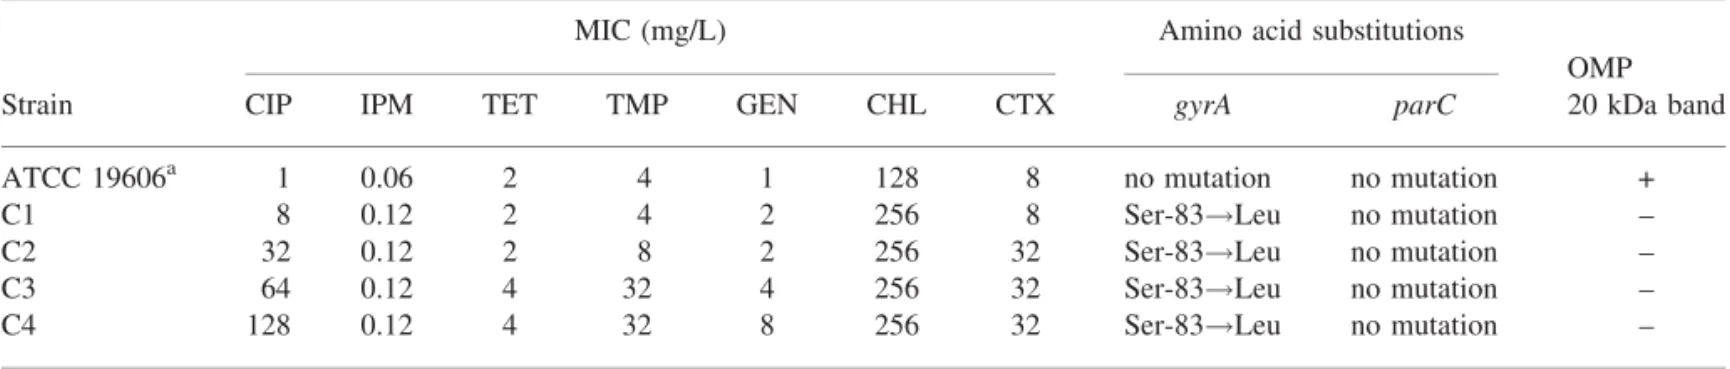 Table 1. Mutations in gyrA and parC genes and MIC values for ciprofloxacin-resistant mutants of A